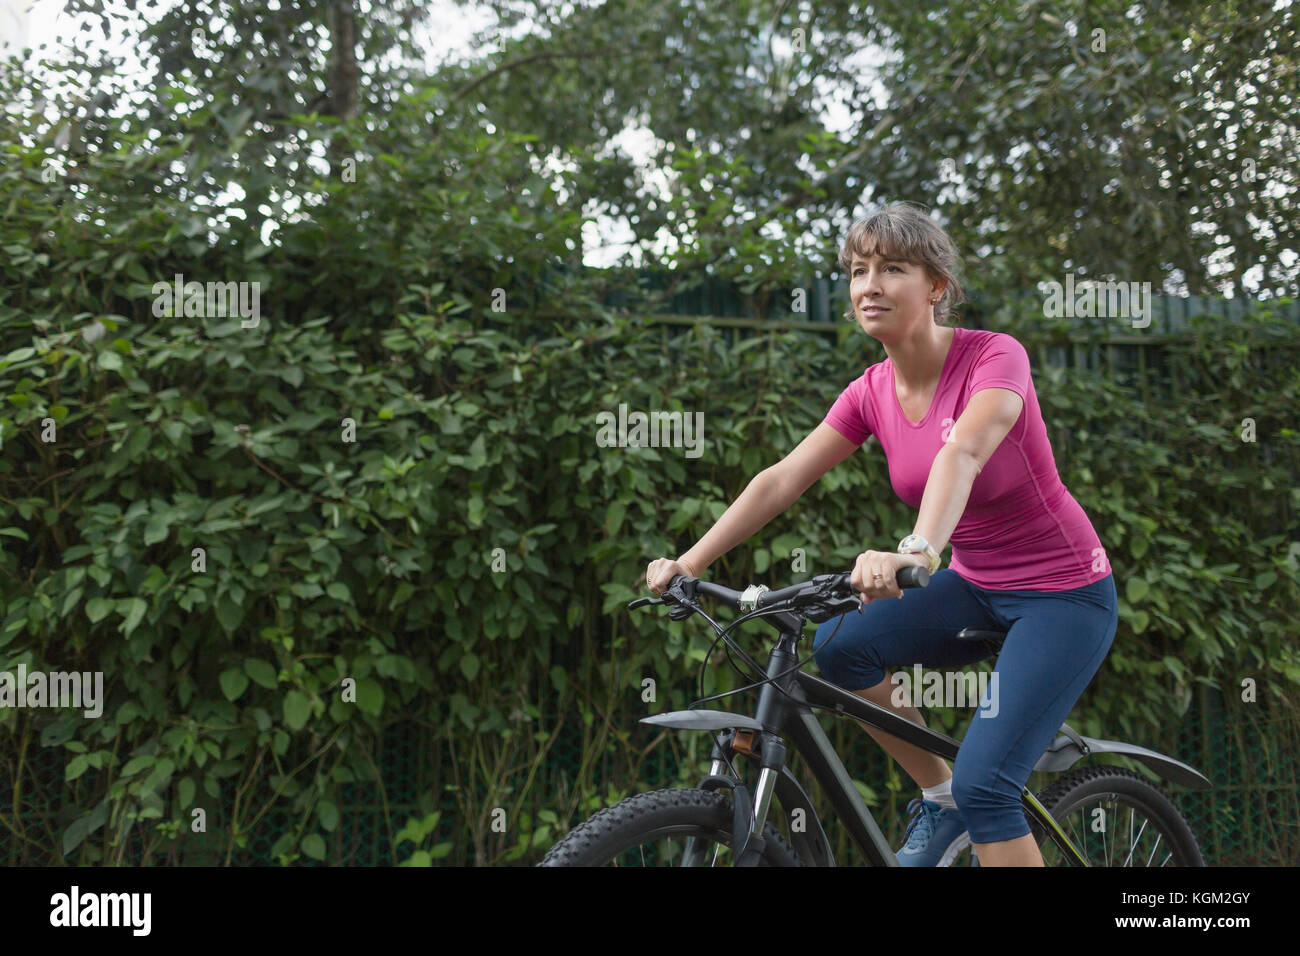 Full length of woman riding bicycle by plants Stock Photo